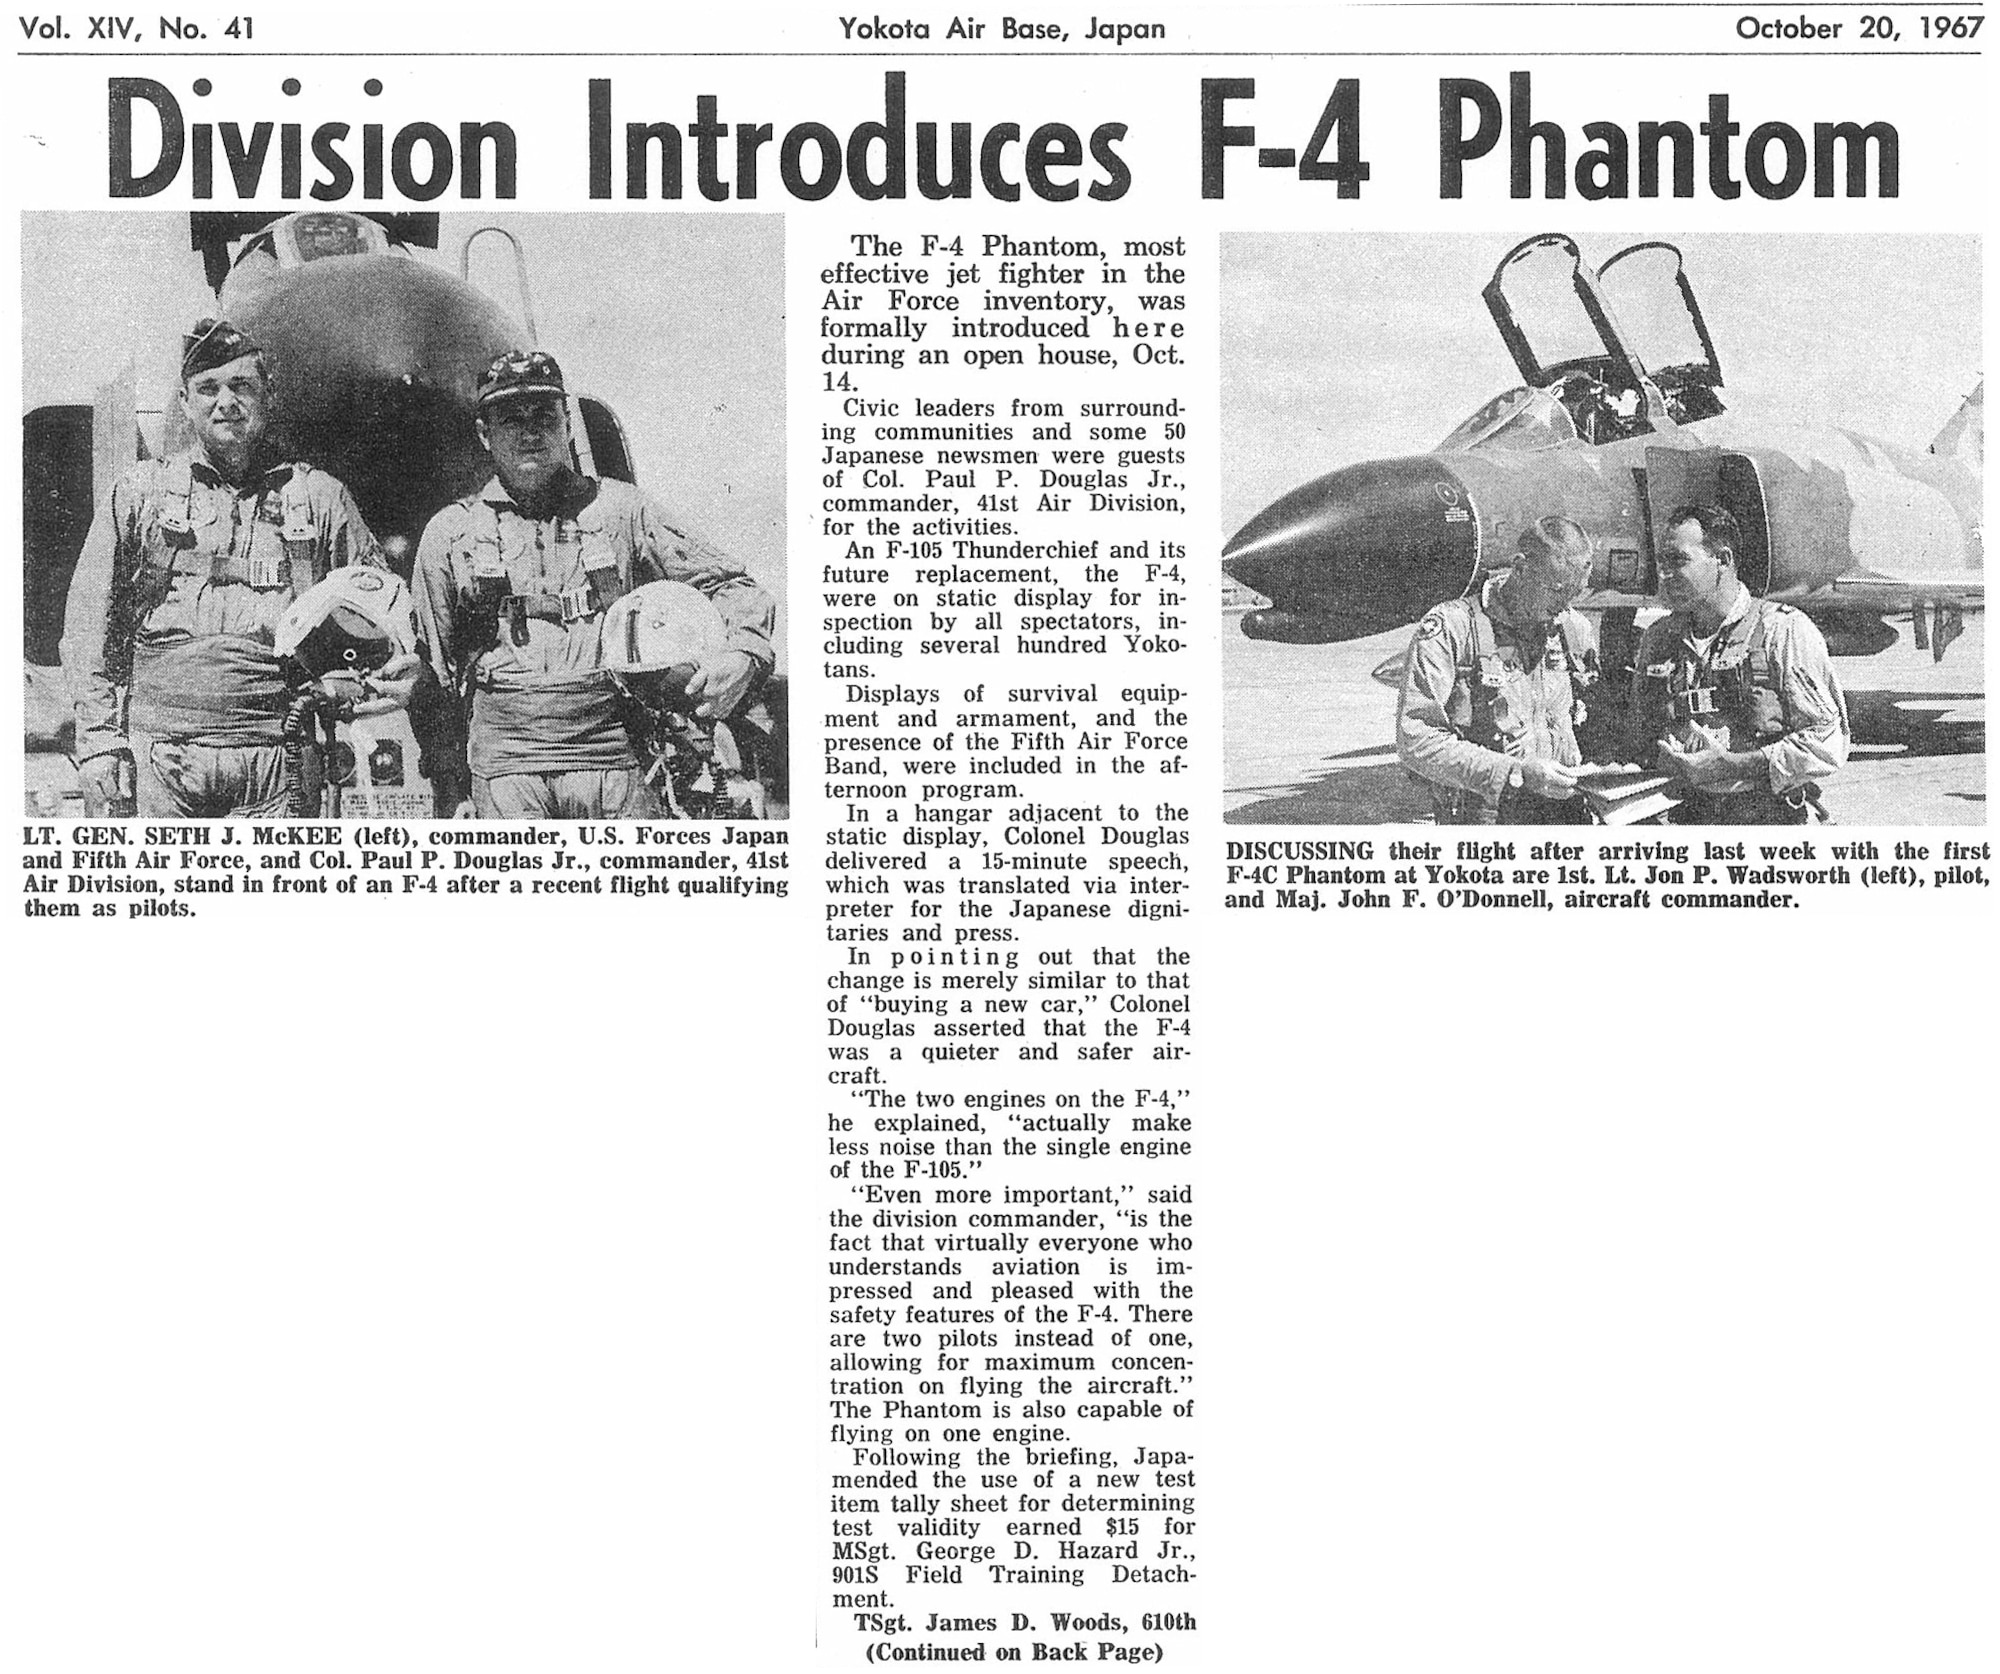 A 20 October 1967 article from the Yokota newspaper Afterburner
announcing the newly arrived F-4Cs. (U.S. Air Force photo courtesy of the 374 AW History Office)
